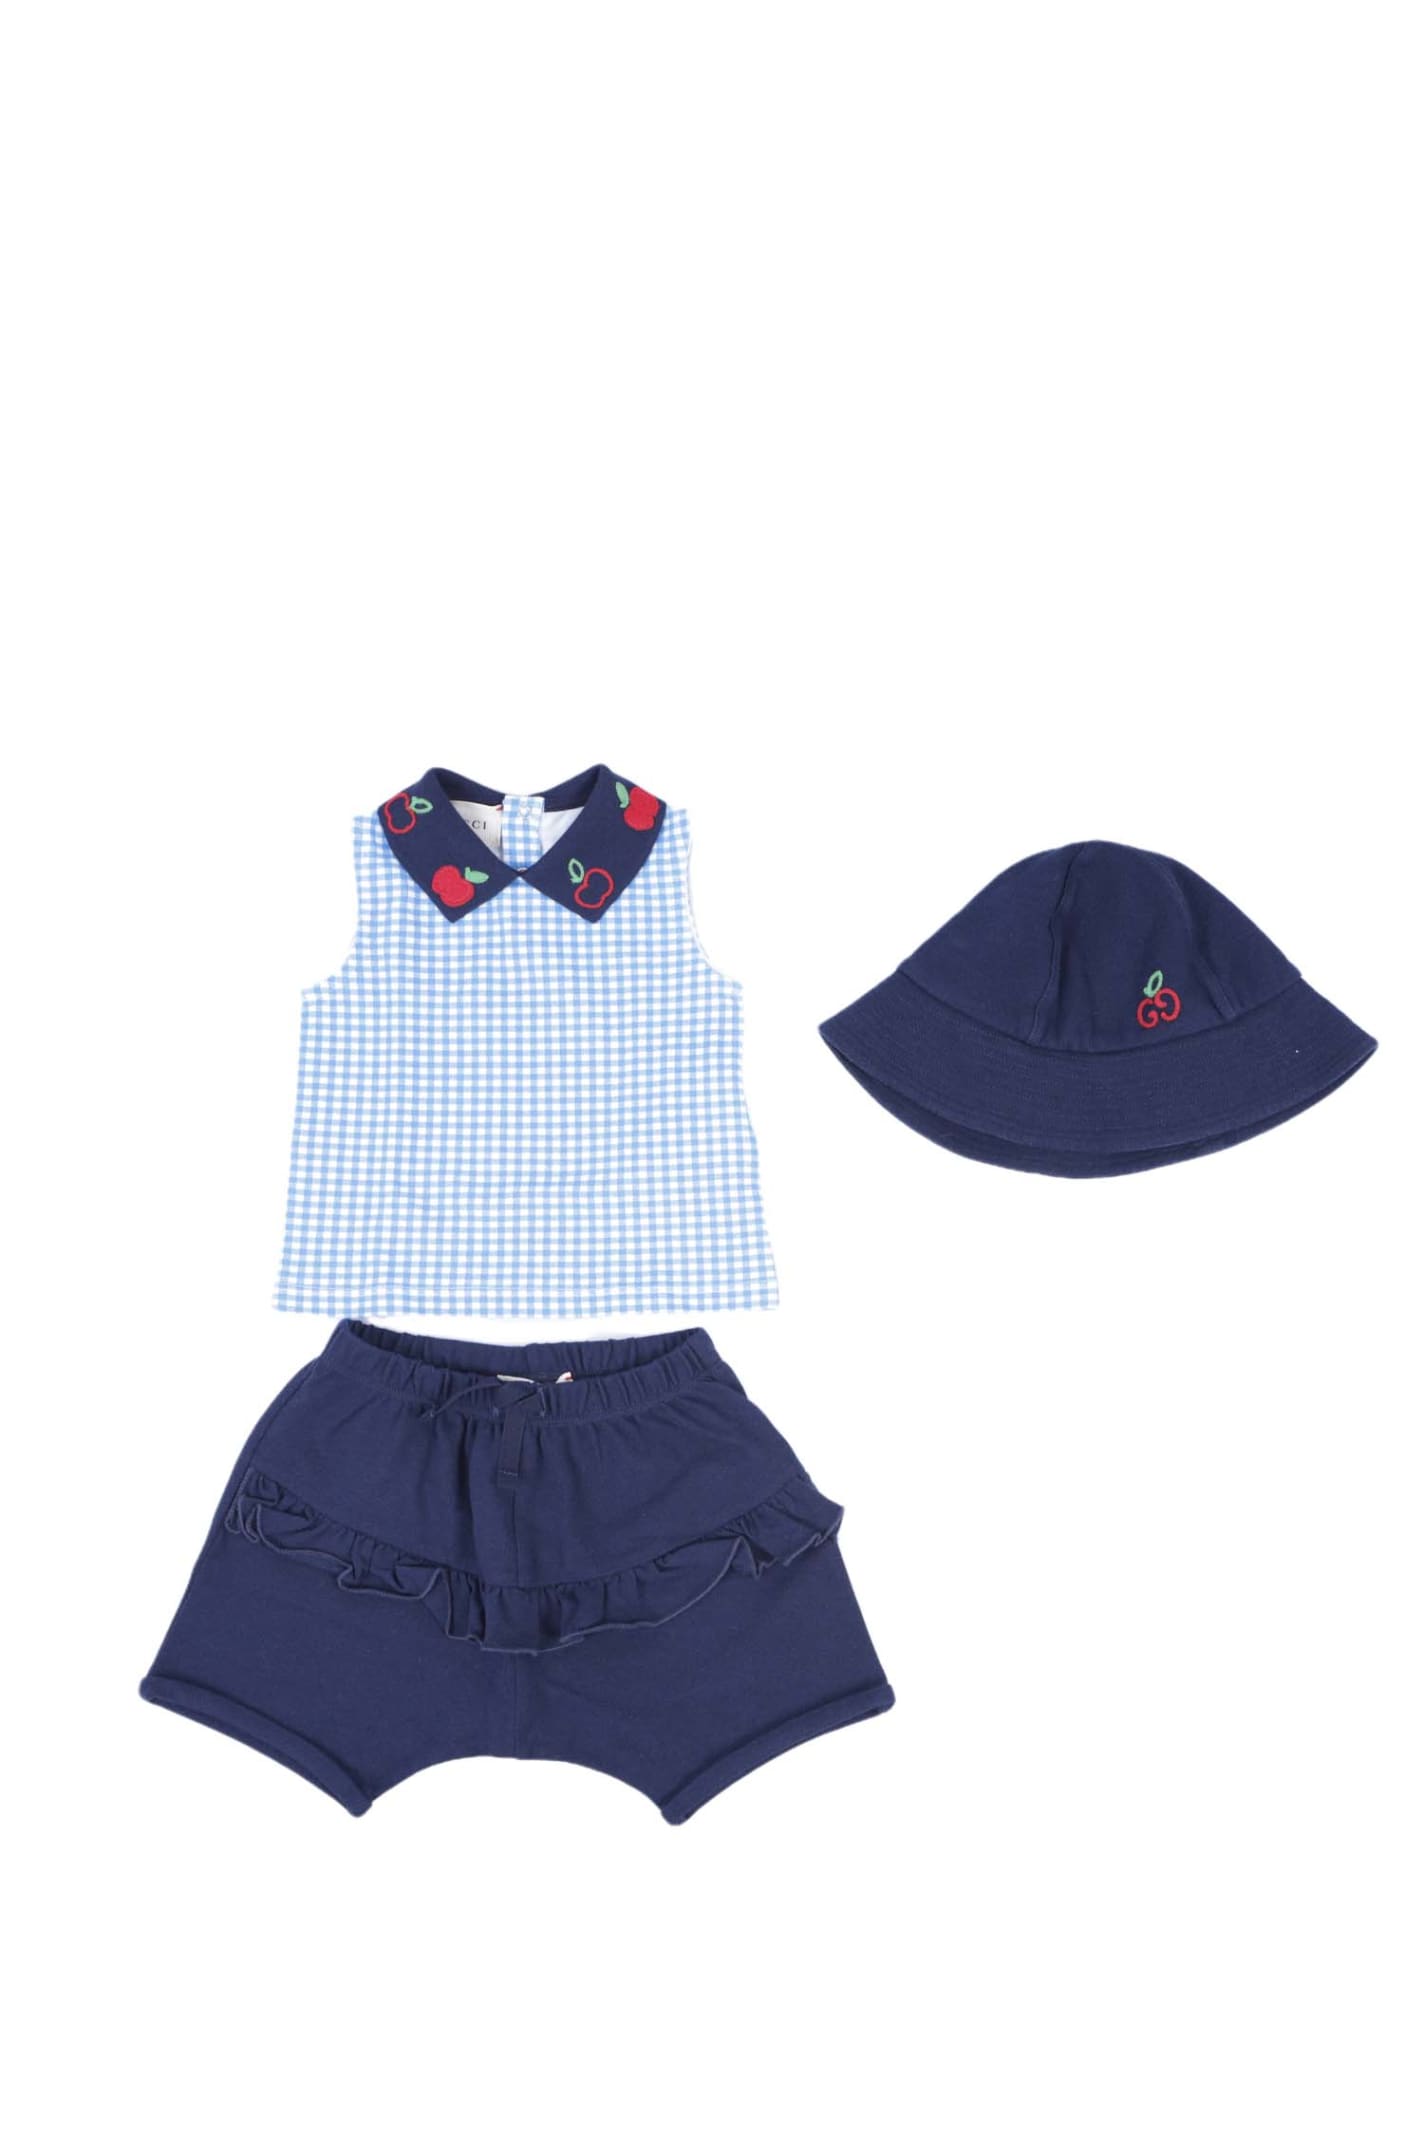 Gucci Babies' Cotton T-shirt, Shorts And Hat In Blue